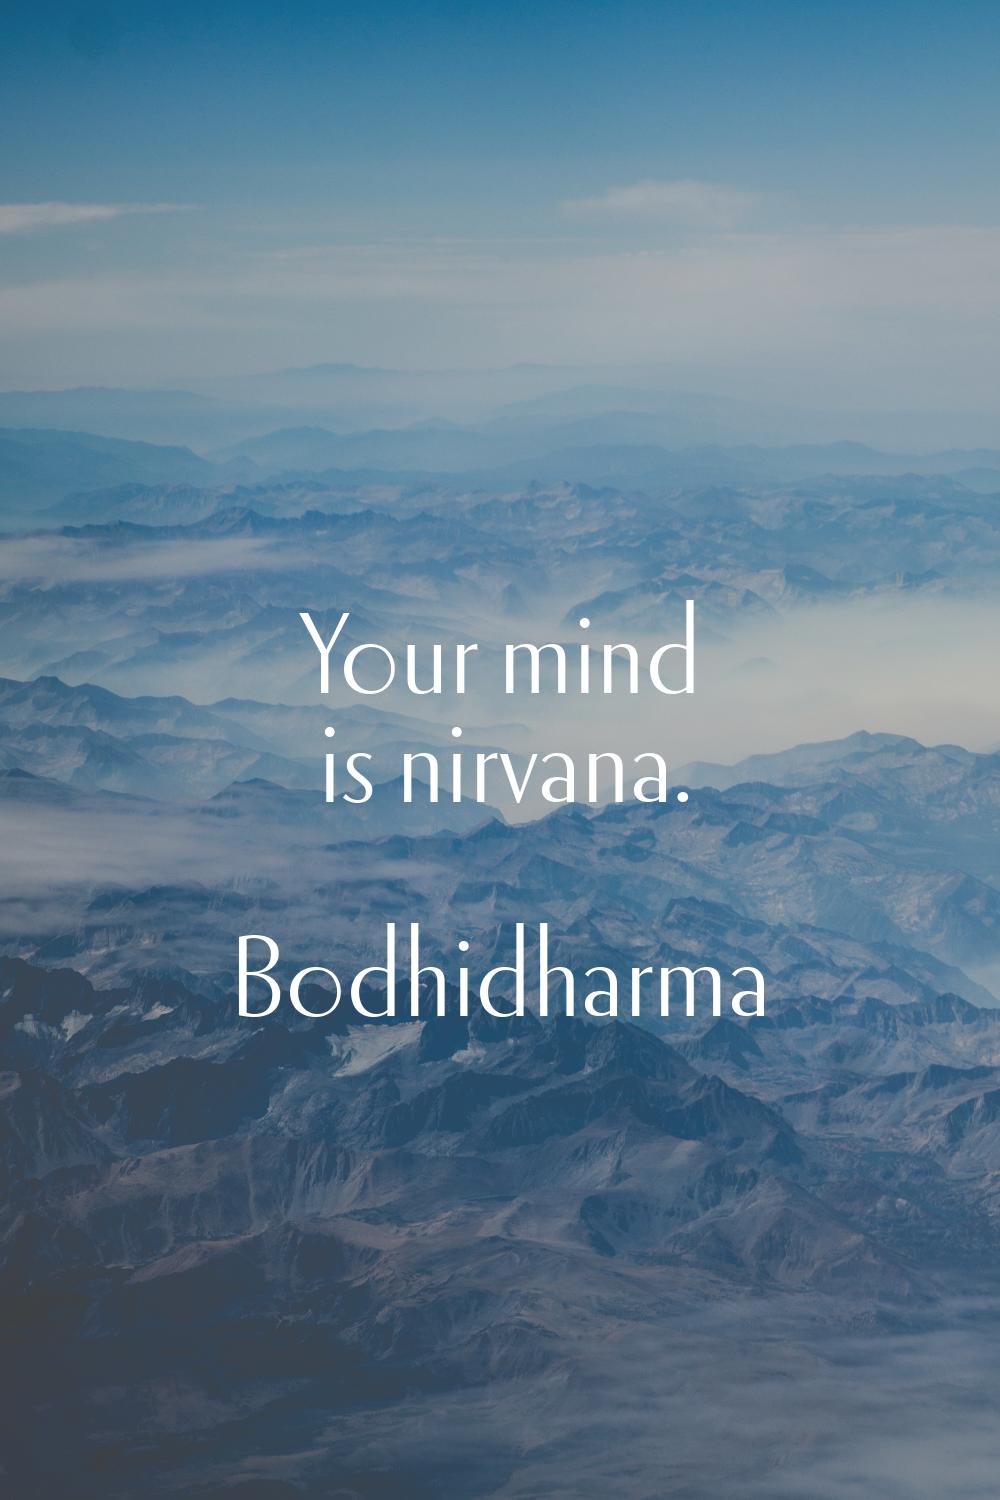 Your mind is nirvana.